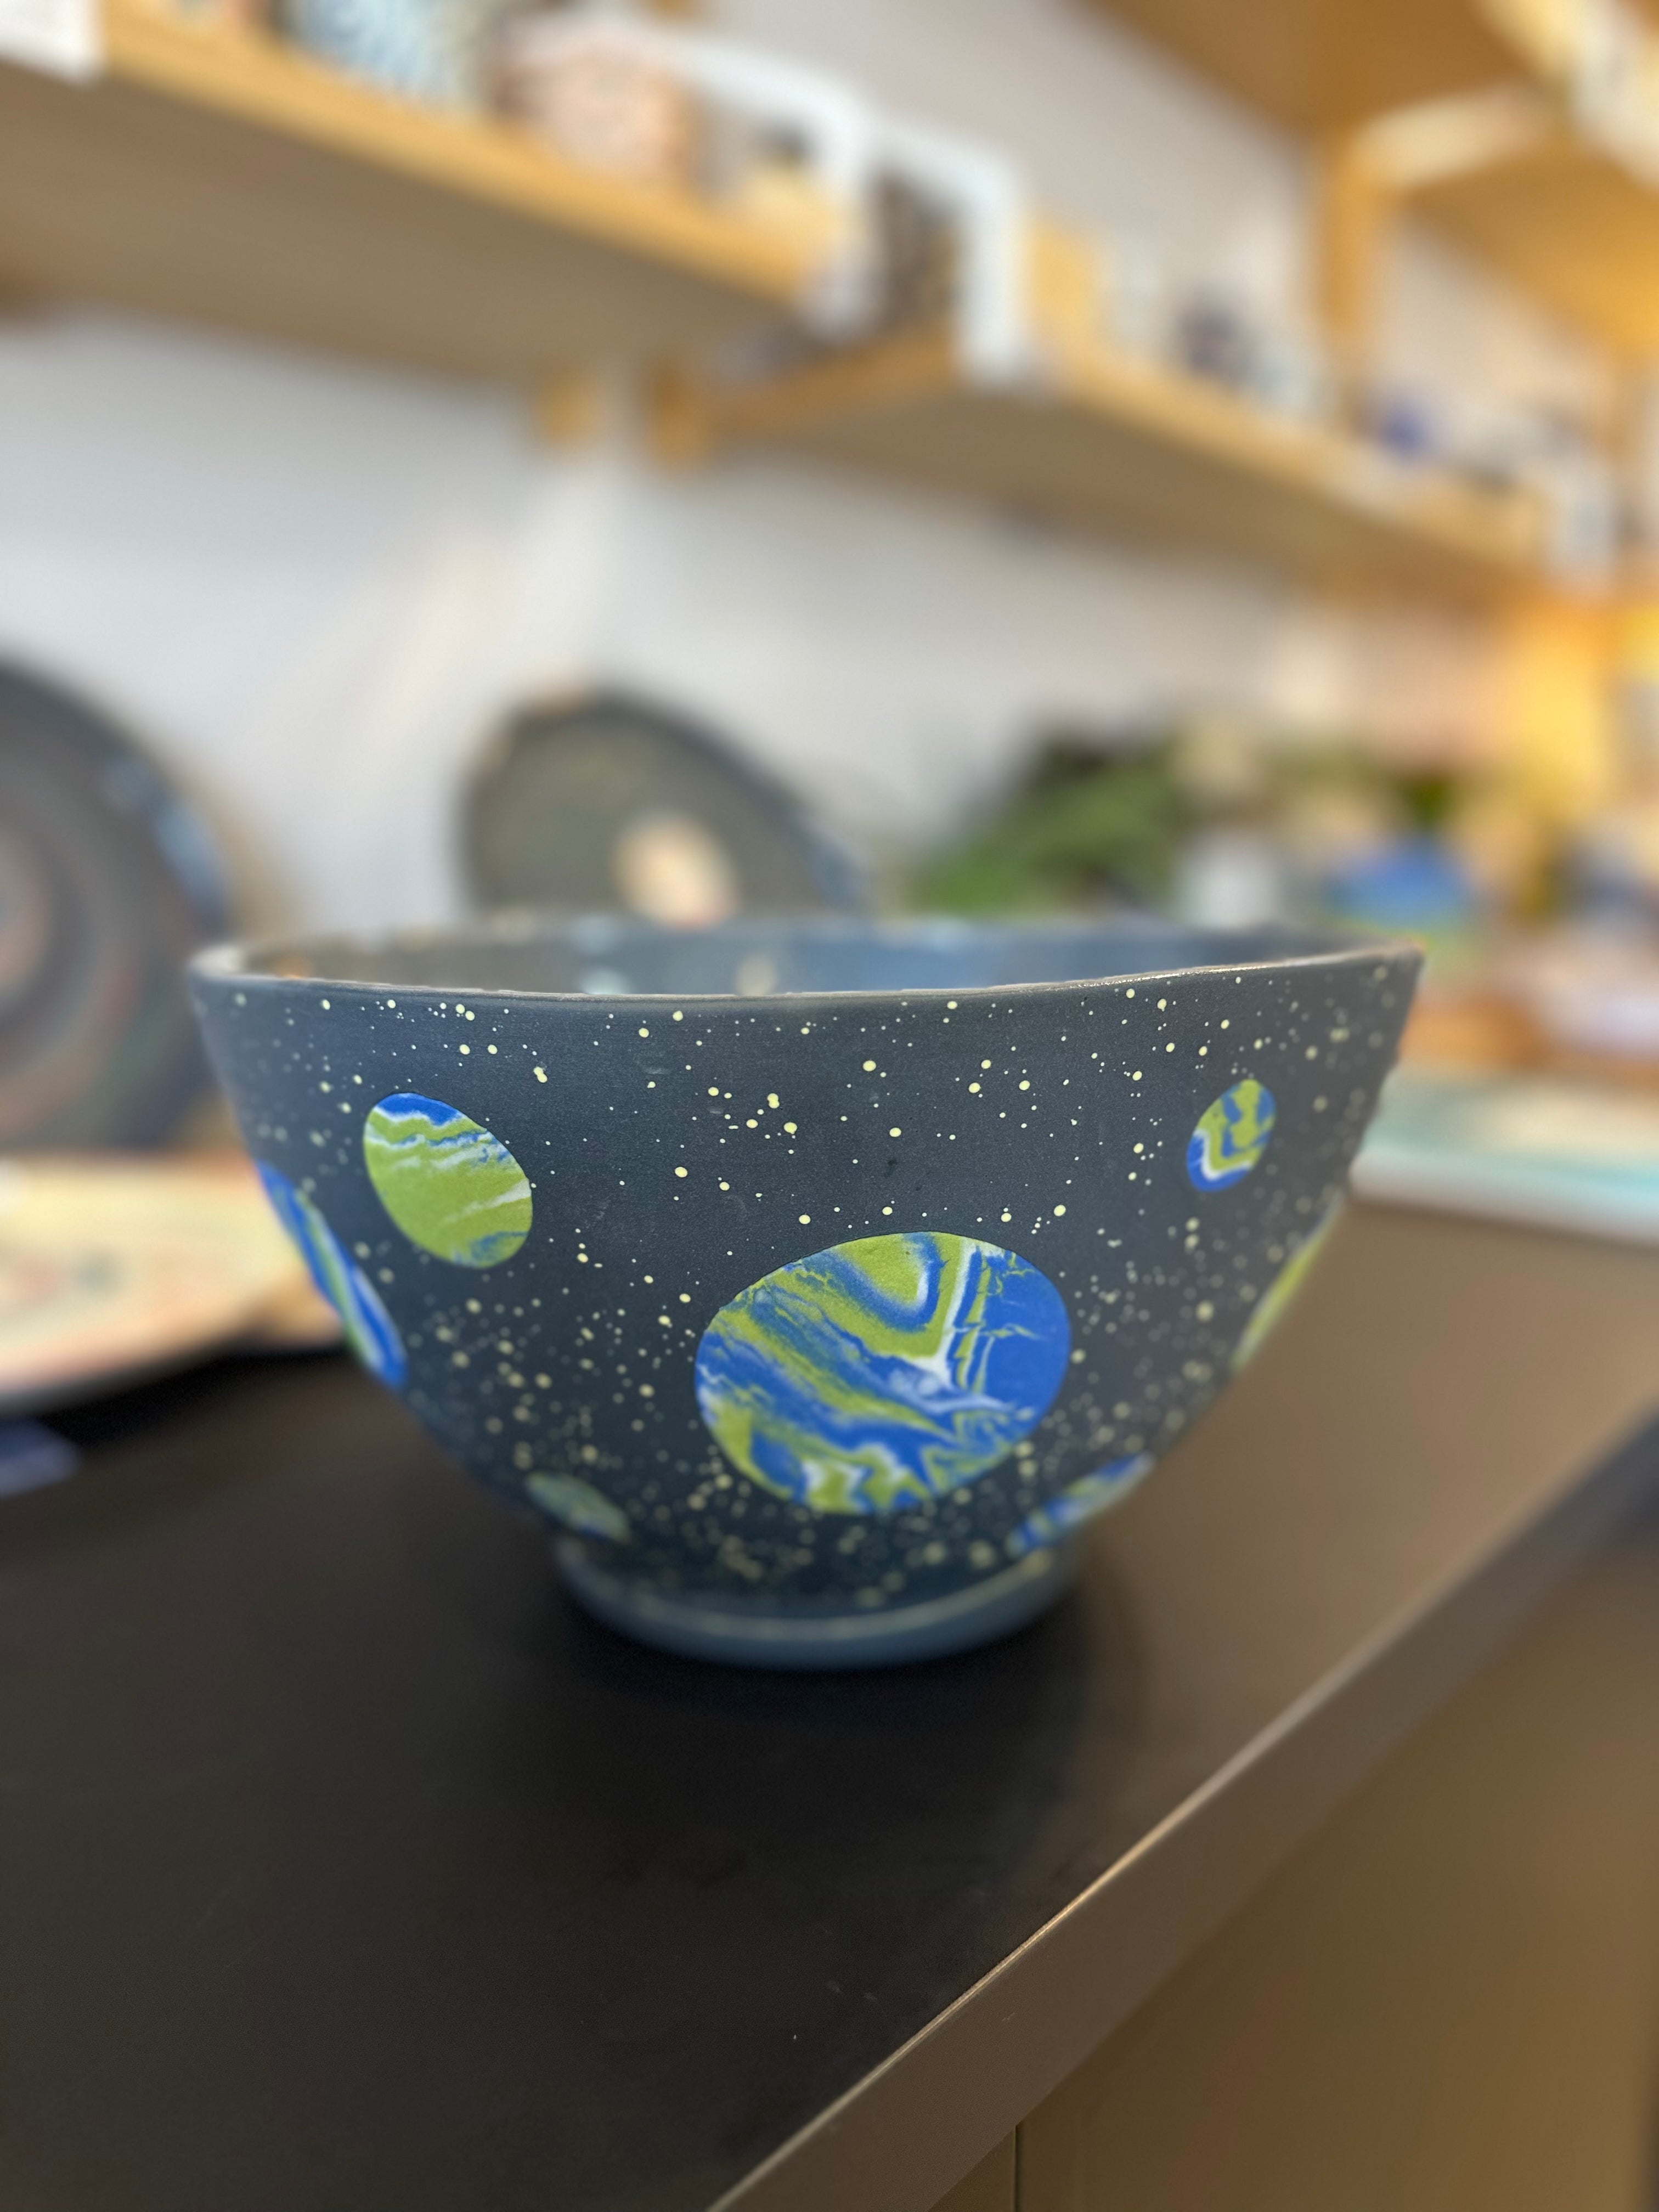 Earth galaxy large serving bowl